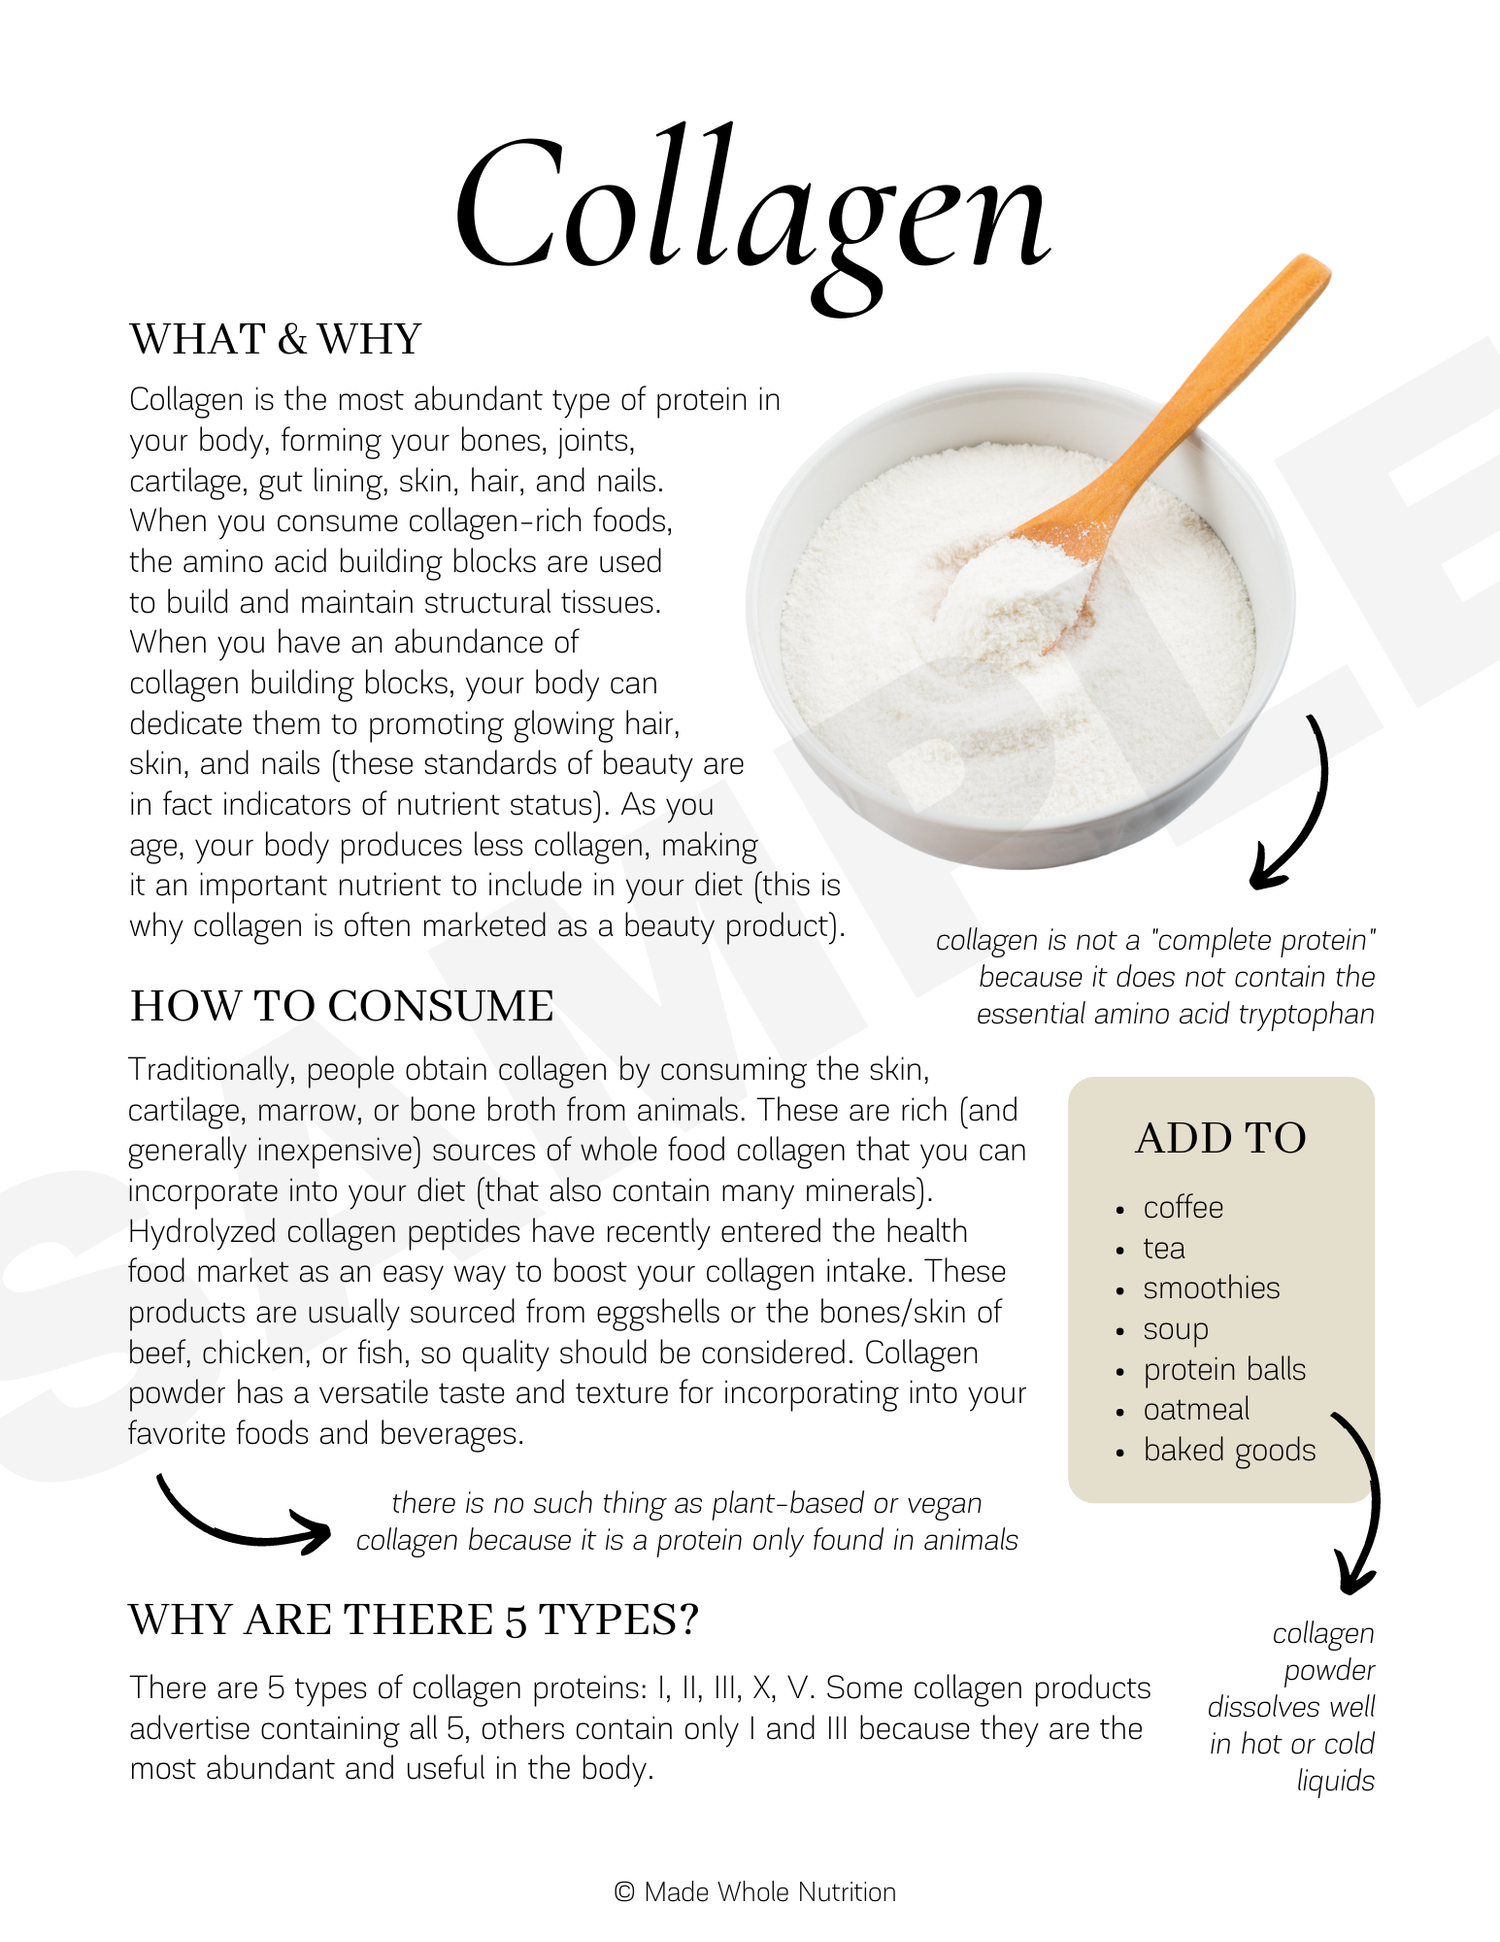 Collagen Handout — Functional Health Research + Resources — Made Whole  Nutrition